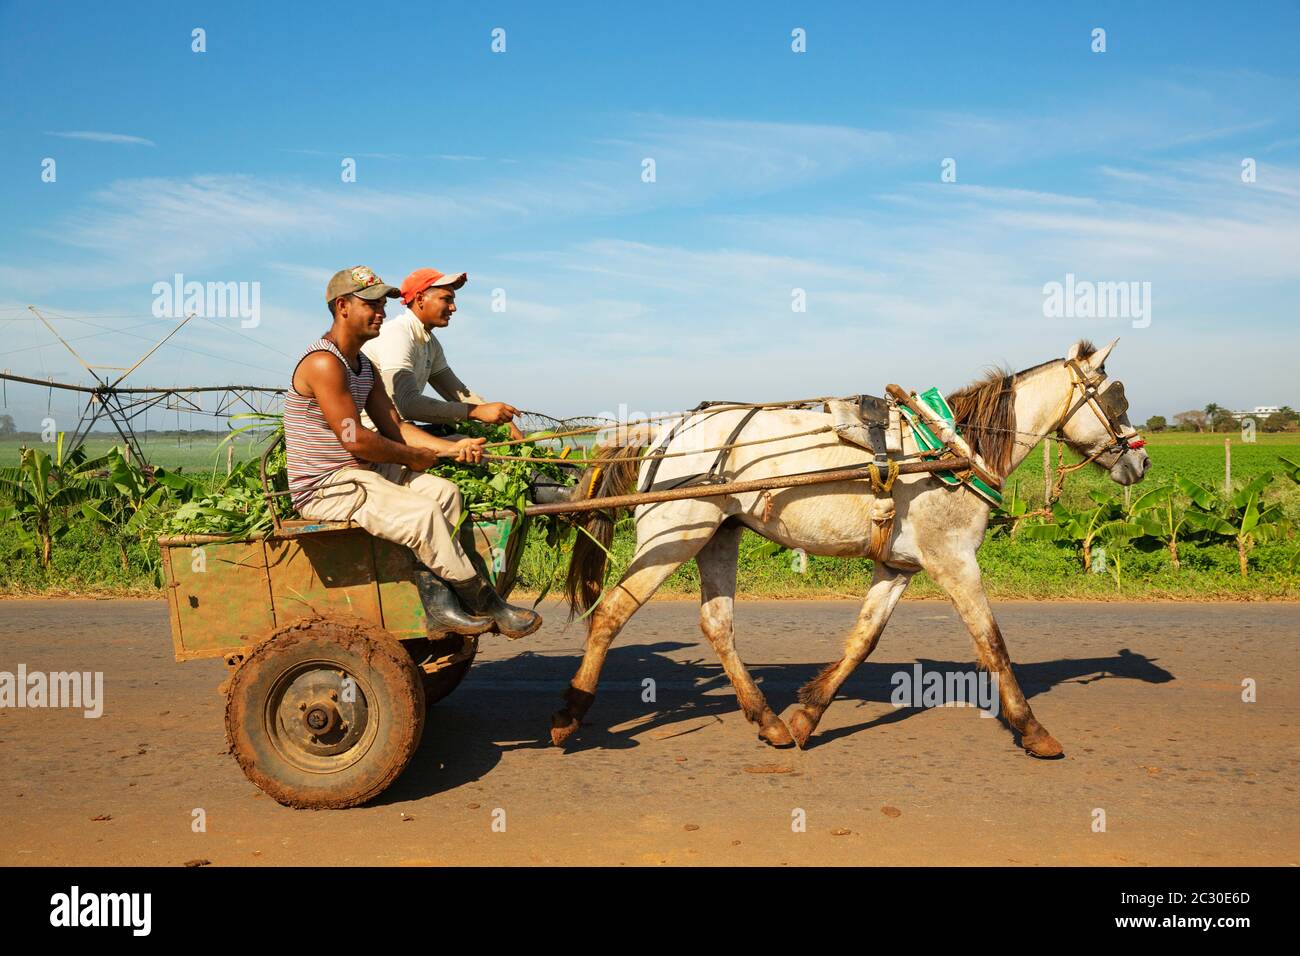 Horse cart at a cultivated field with irrigation system, Cienfuegos province, Cuba Stock Photo